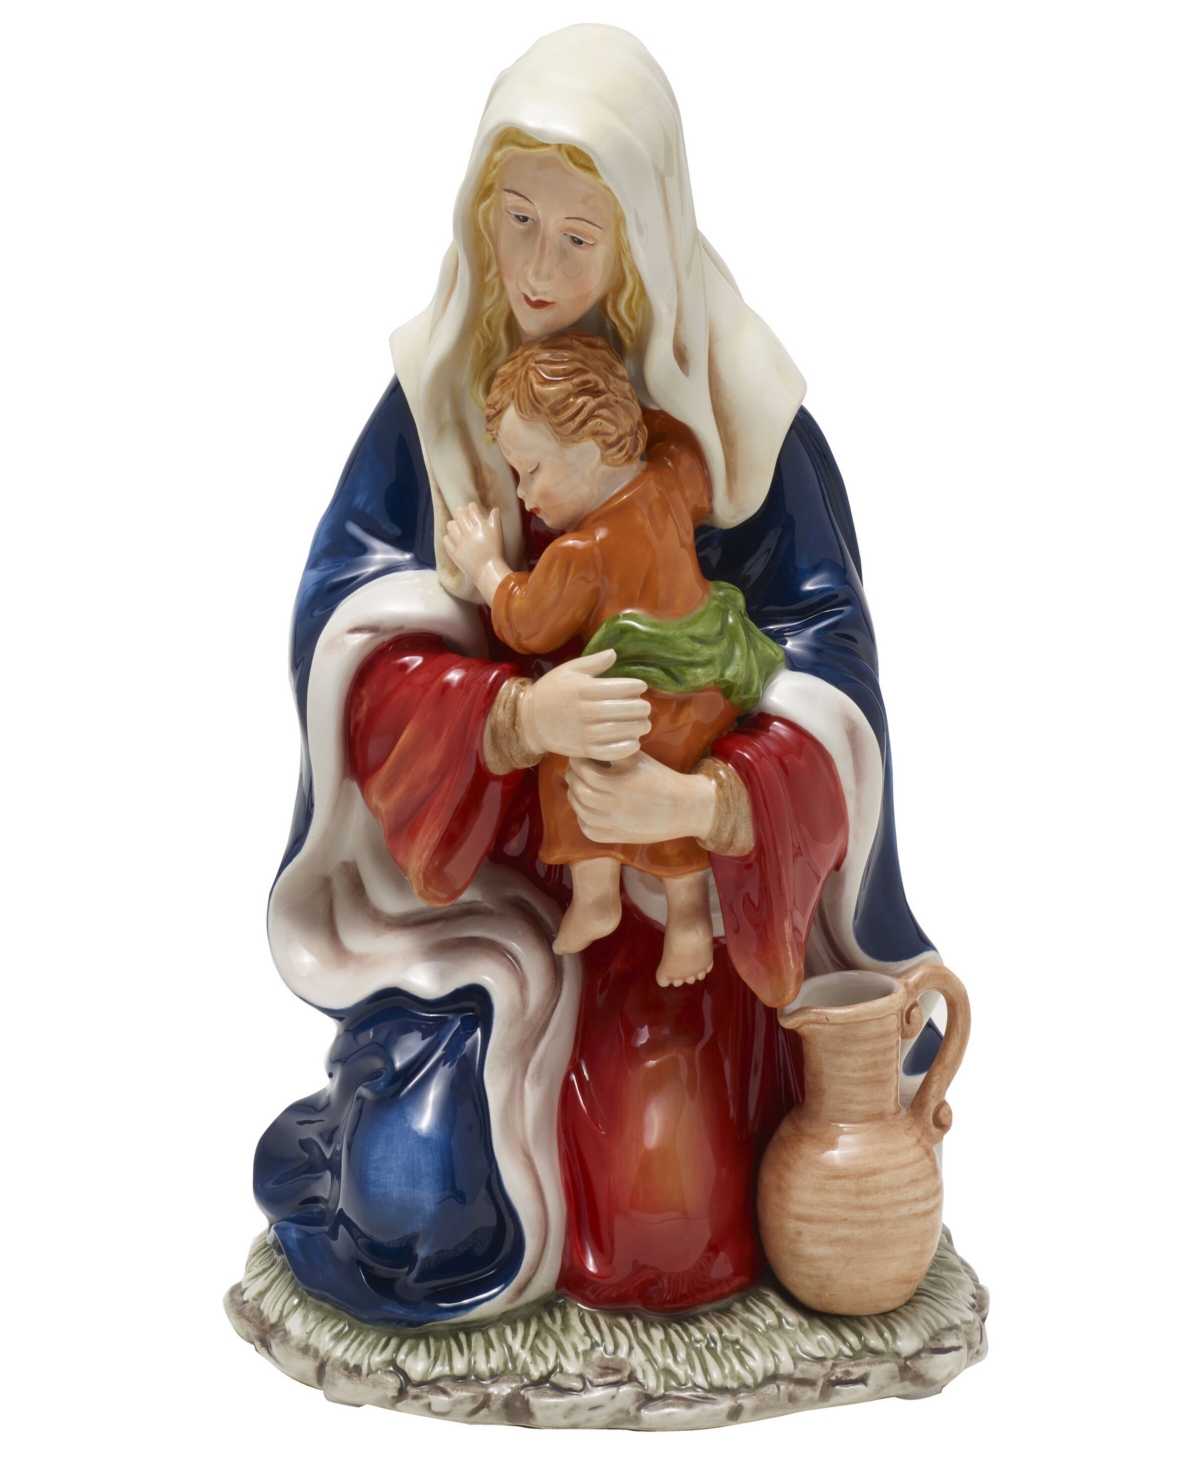 Fitz And Floyd Madonna And Child Figurine, 9.25-inch In Red